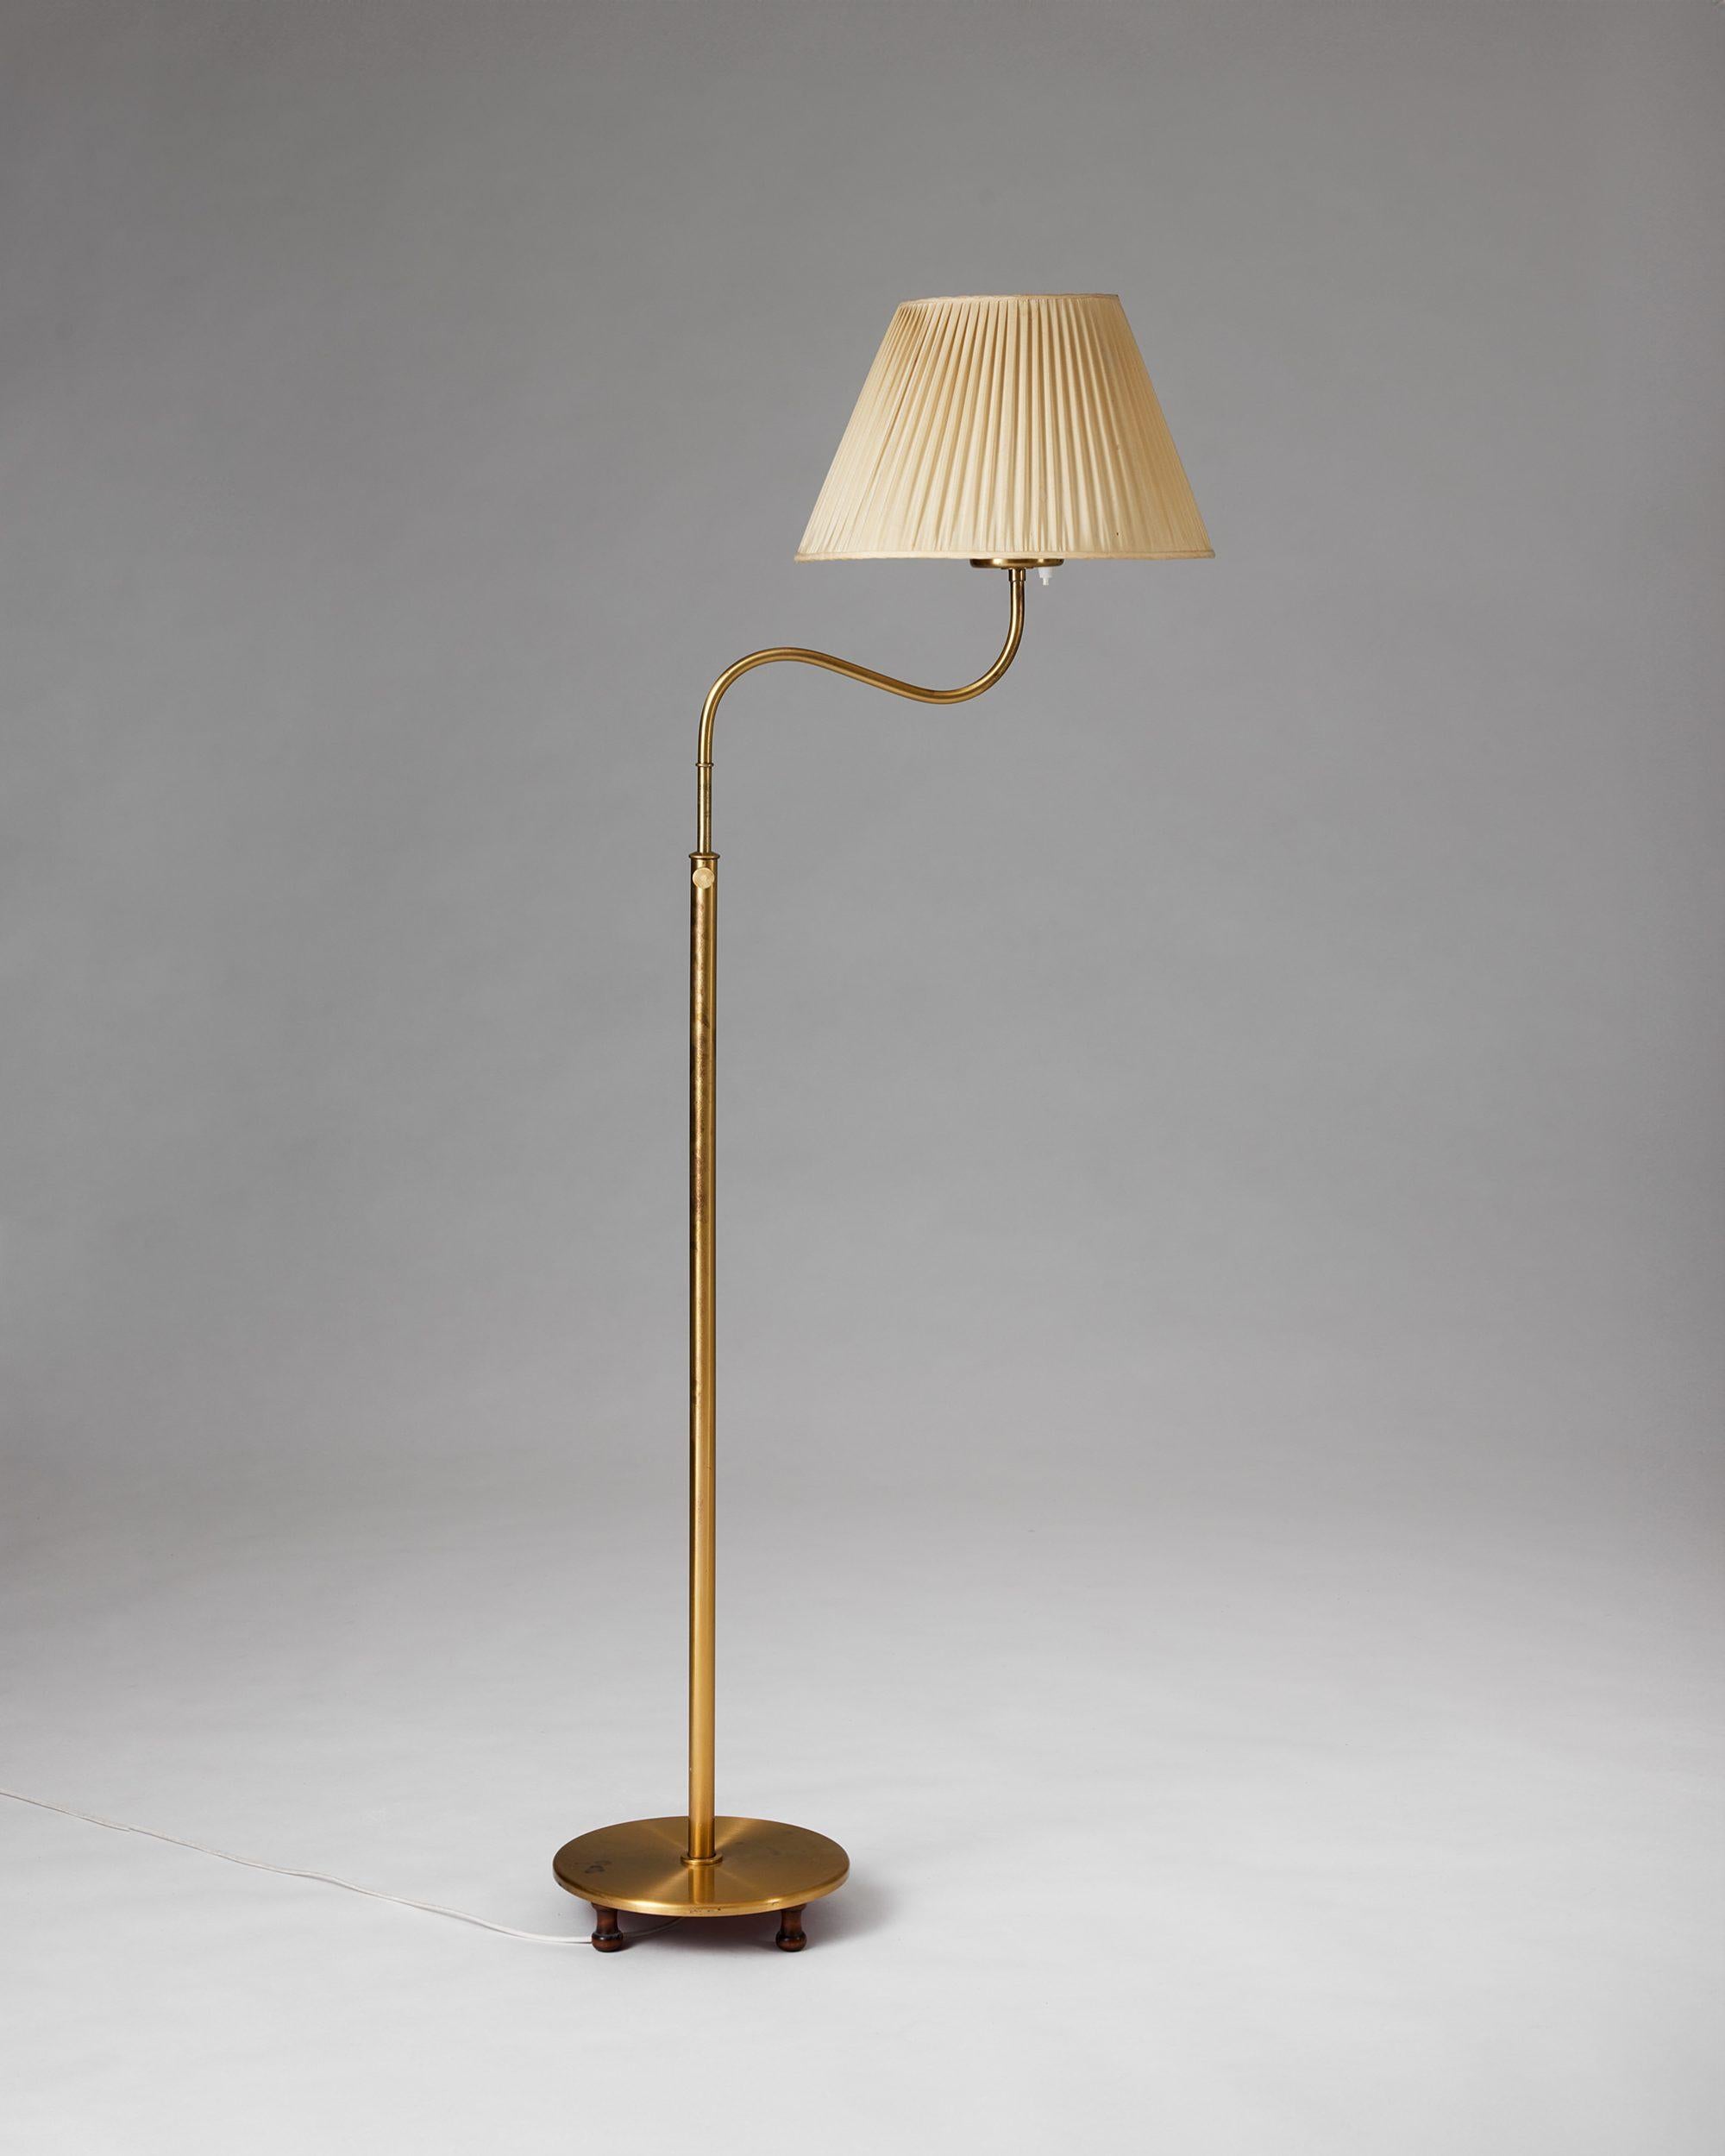 Floor lamp ‘Small Camel’ model 2568 designed by Josef Frank for Svenskt Tenn,
Sweden, 1939.

Brass, enamelled steel and mahogany.

Josef Frank was a true European, he was also a pioneer of what would become classic 20th century Swedish design and